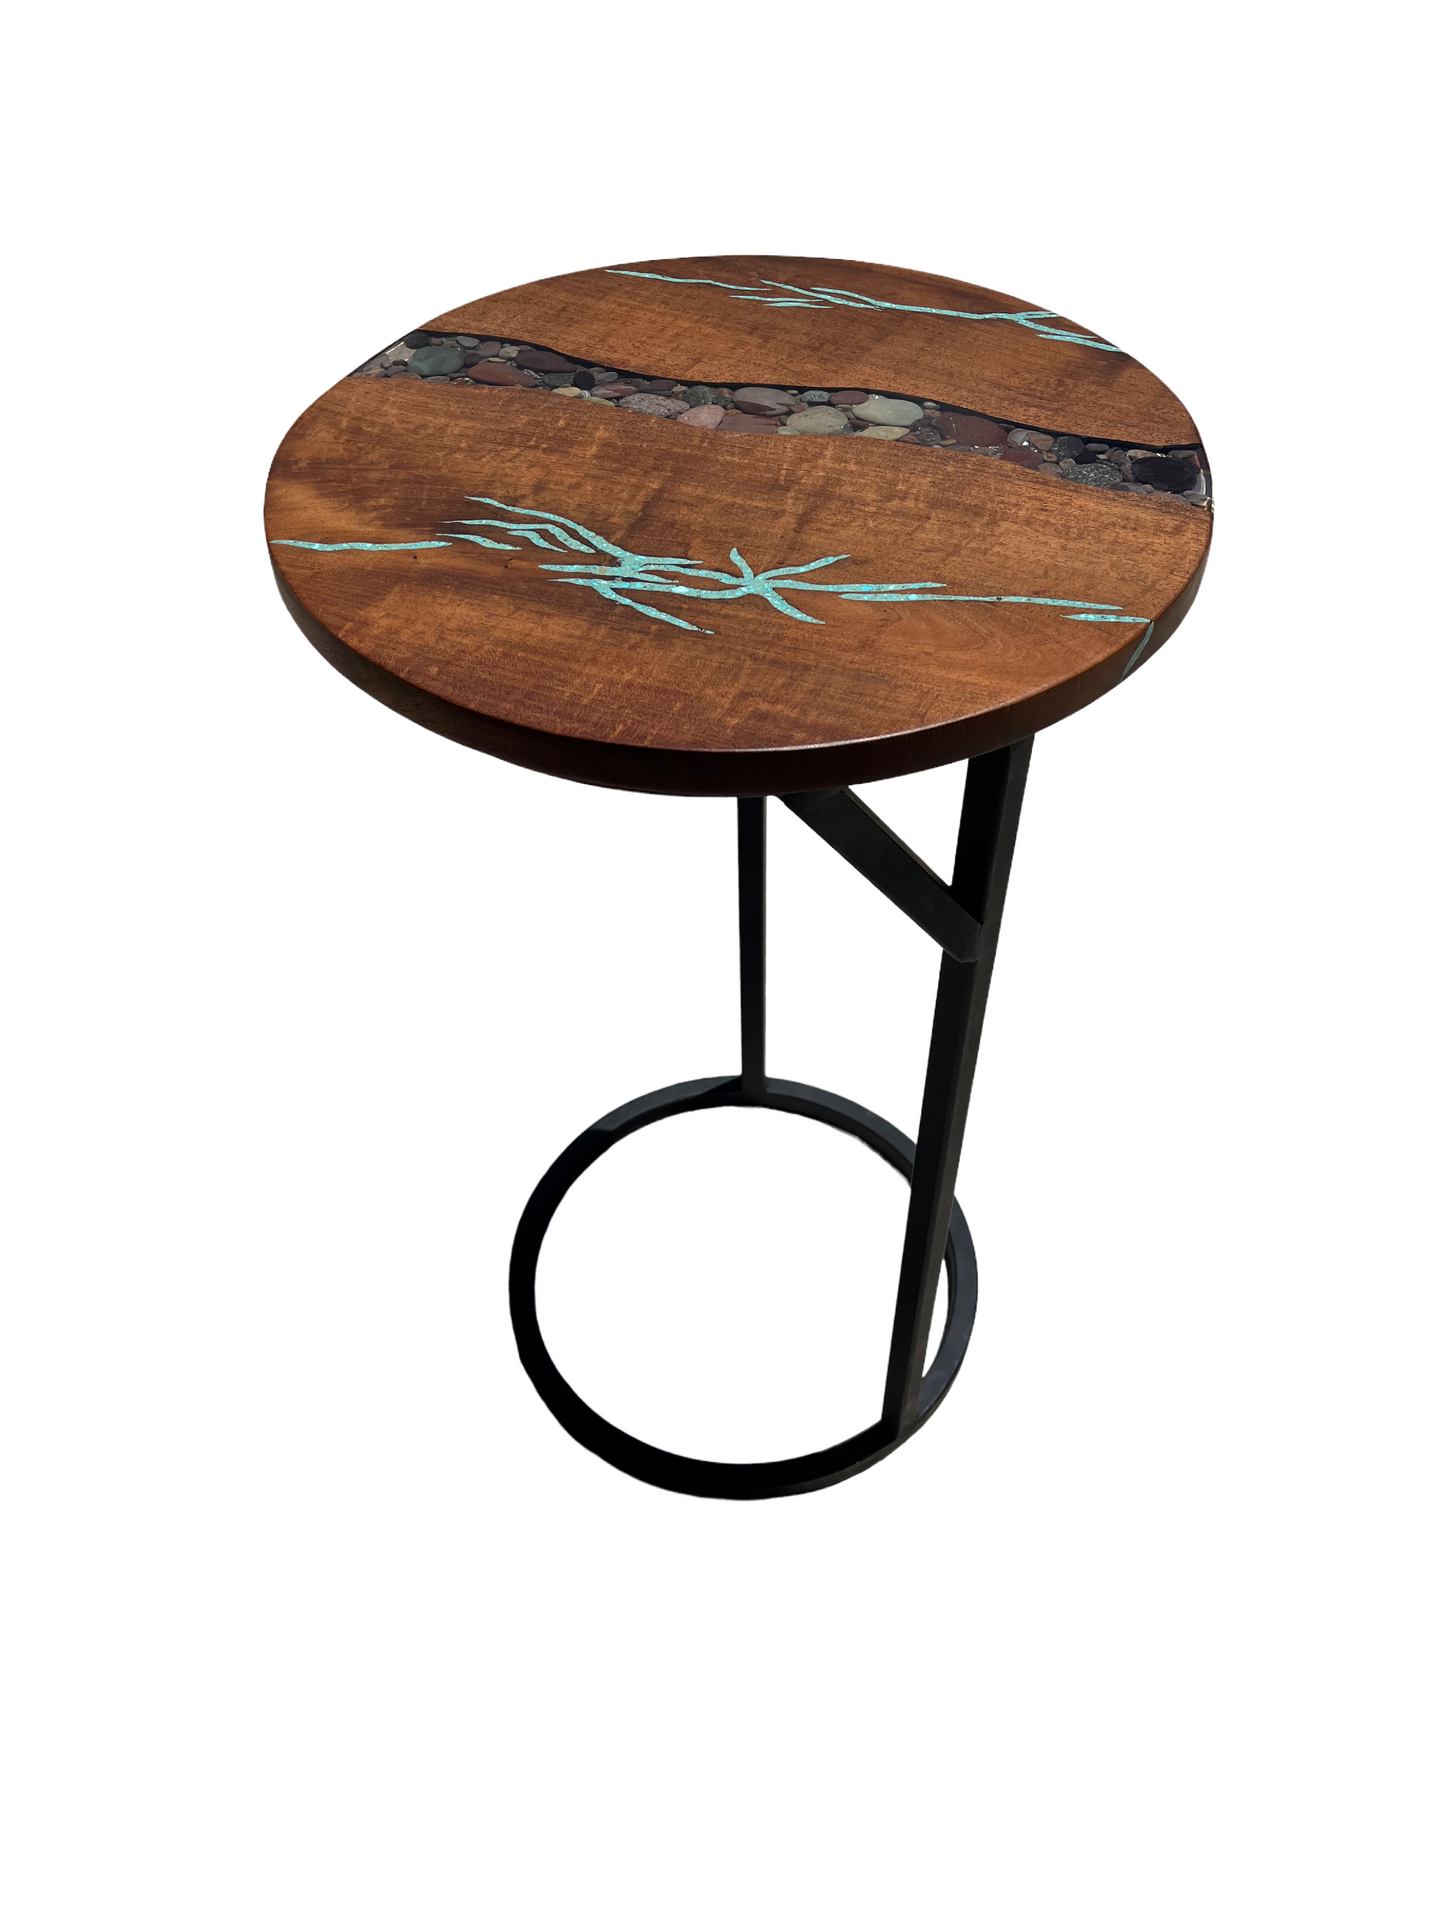 Round table with turquoise and river rock inlay